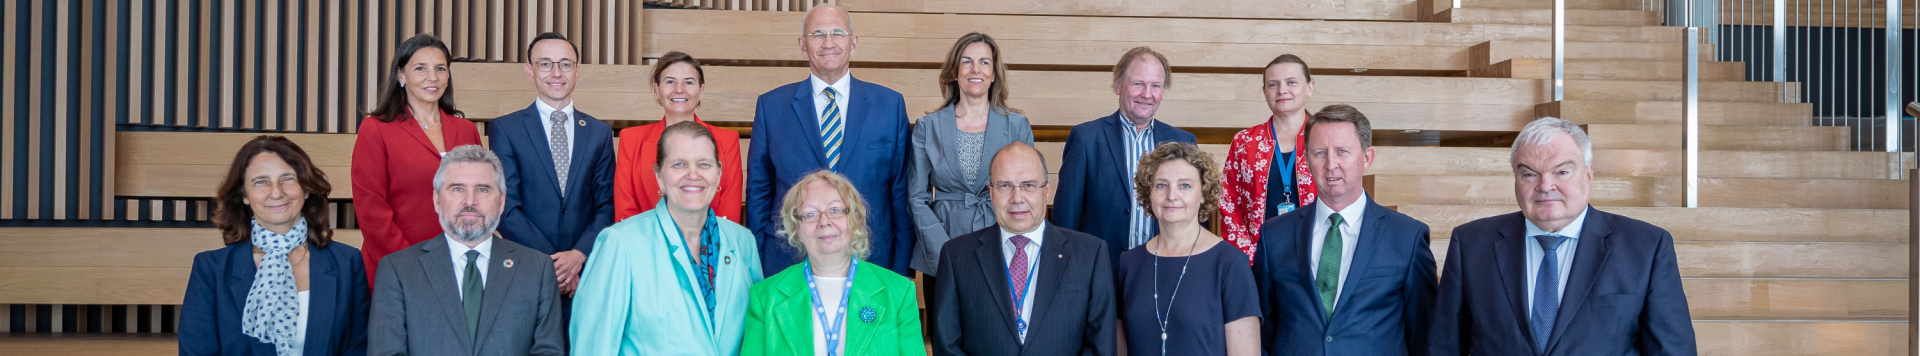 A group photo of the Senior Management Team of UNOG in front of stairs.